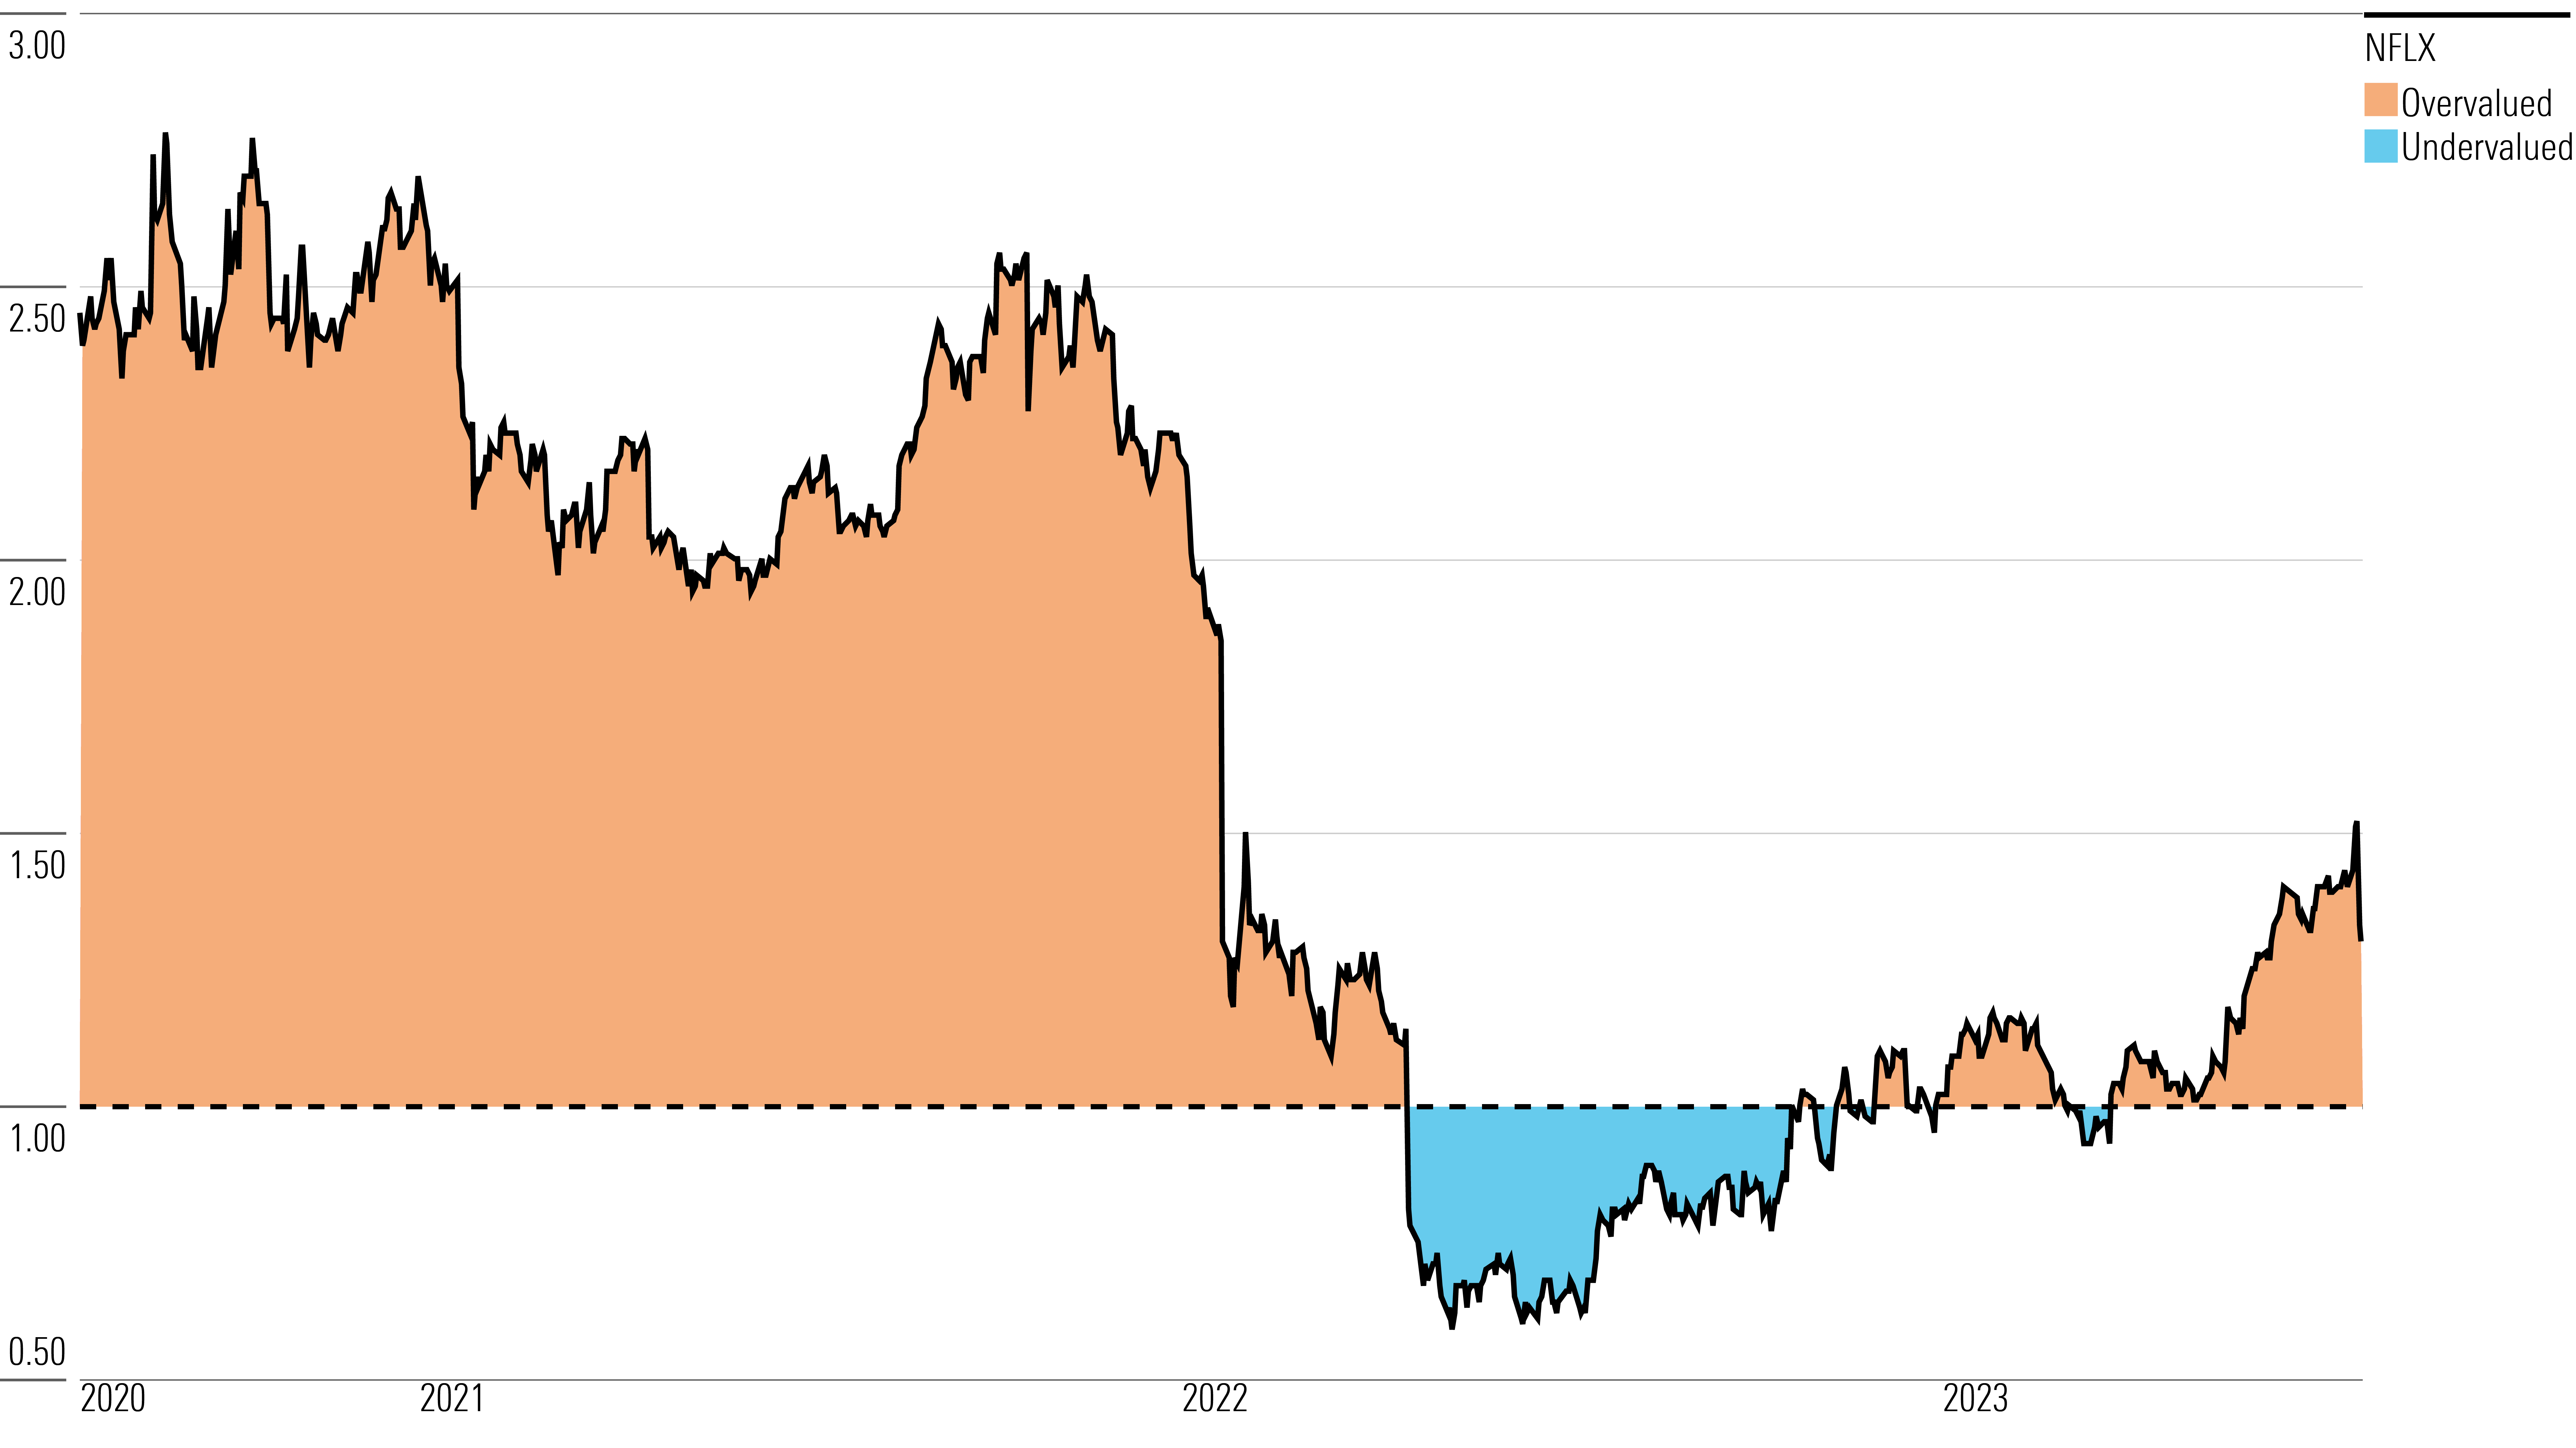 Displaying Netflix's 3 year historical price/fair value ratios